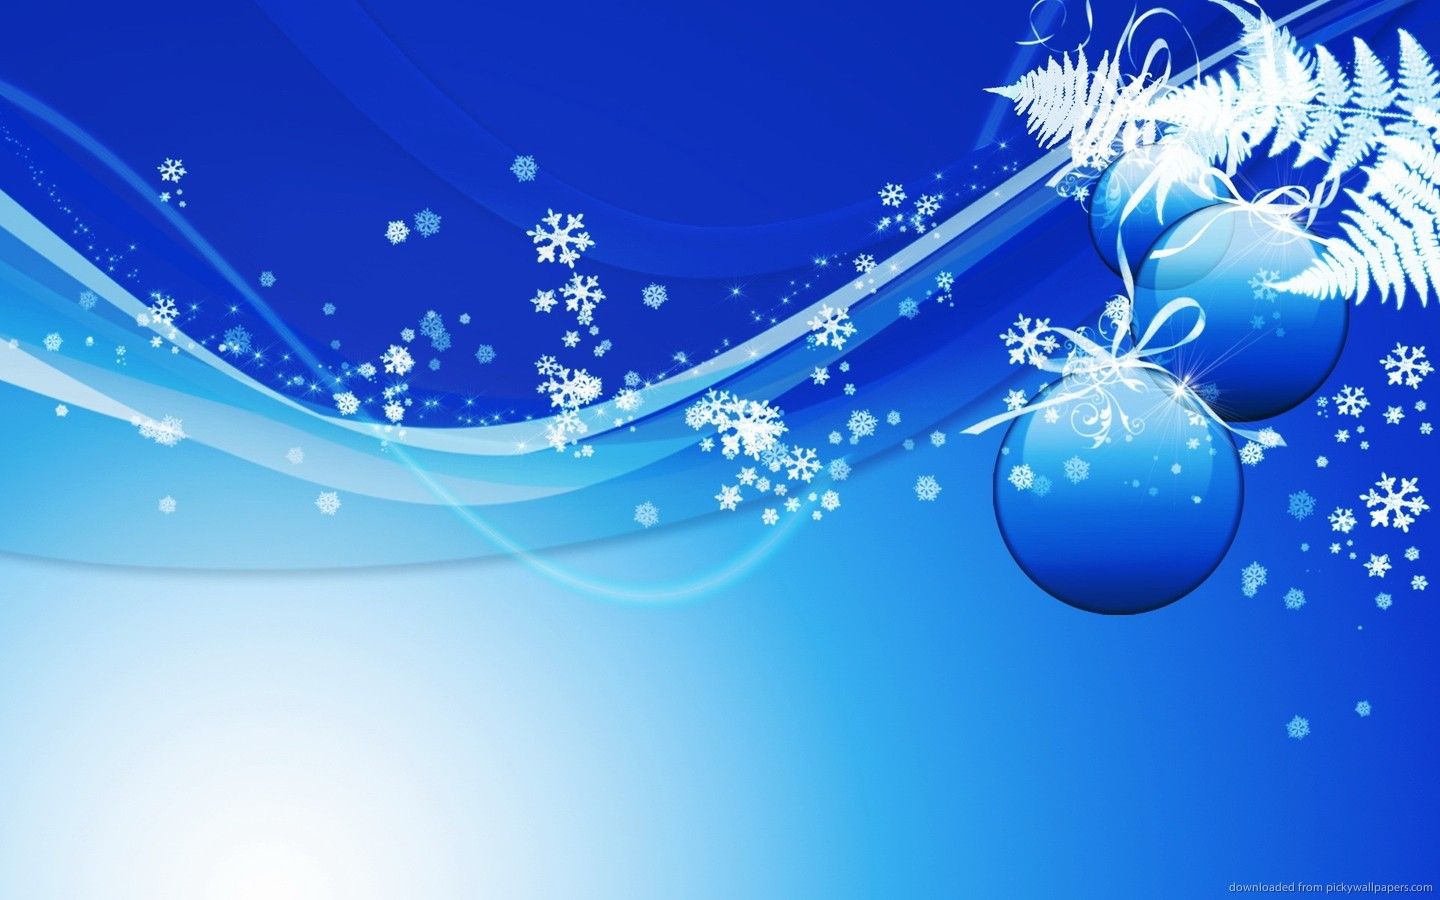 Blue Christmas Backgrounds - Wallpaper Cave